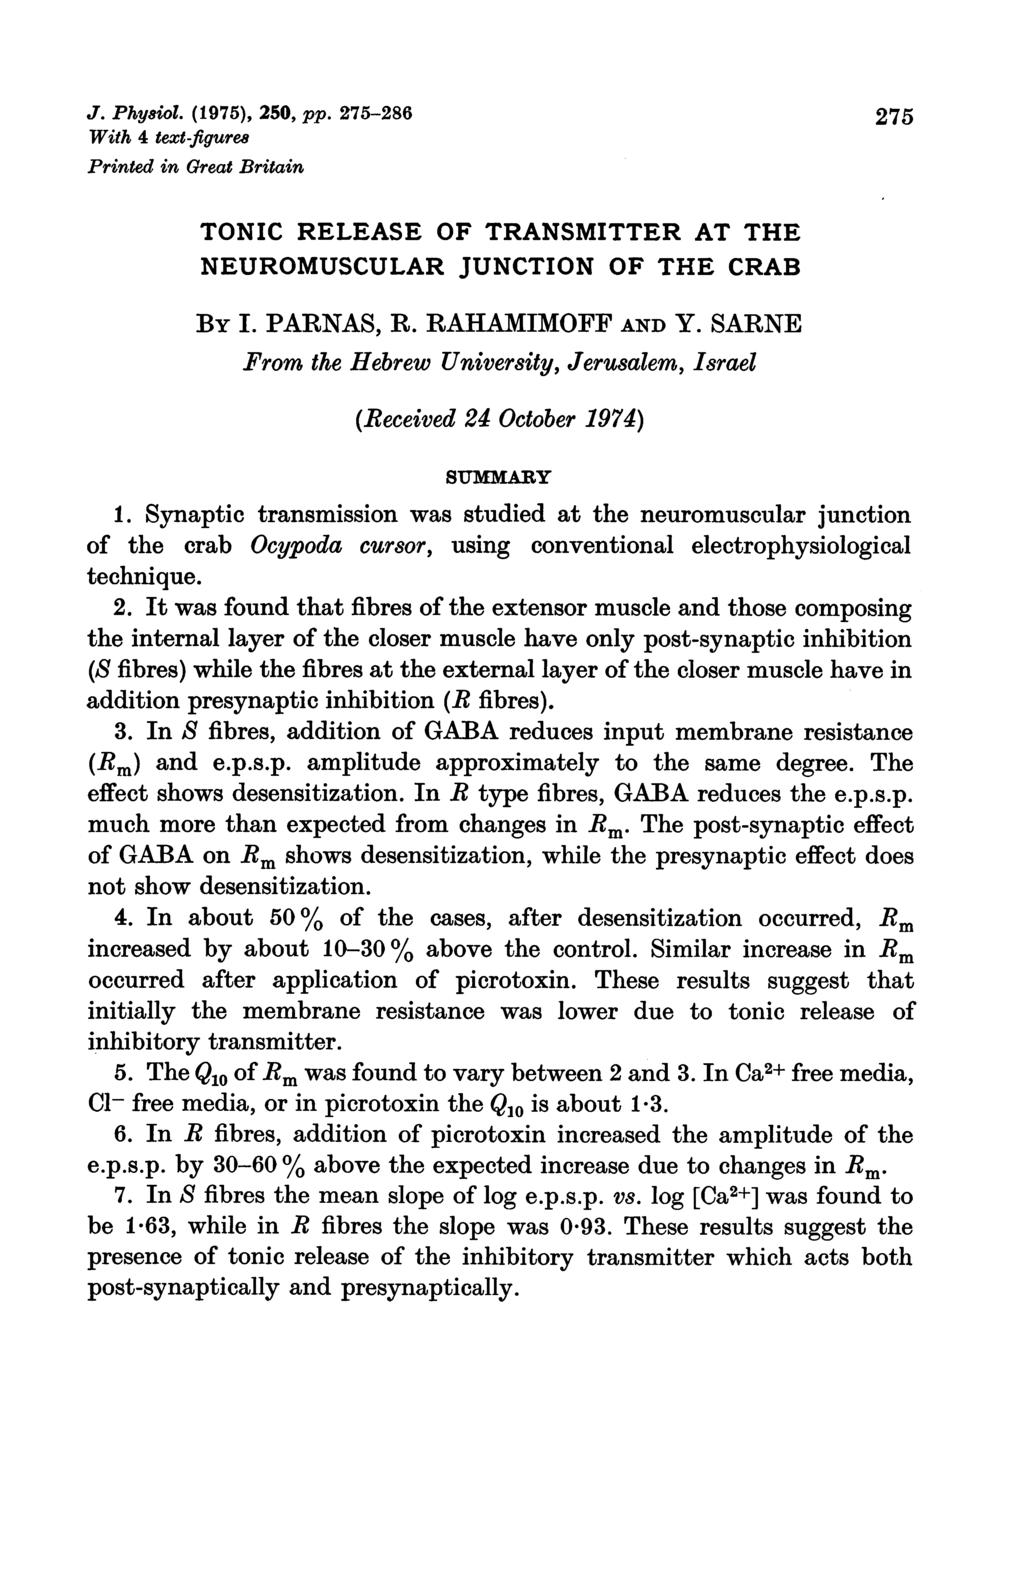 J. Physiol. (1975), 250, pp. 275-286 275 With 4 text-ftgurew Printed in Great Britain TONIC RELEASE OF TRANSMITTER AT THE NEUROMUSCULAR JUNCTION OF THE CRAB BY I. PARNAS, R. RAHAMIMOFF AND Y.